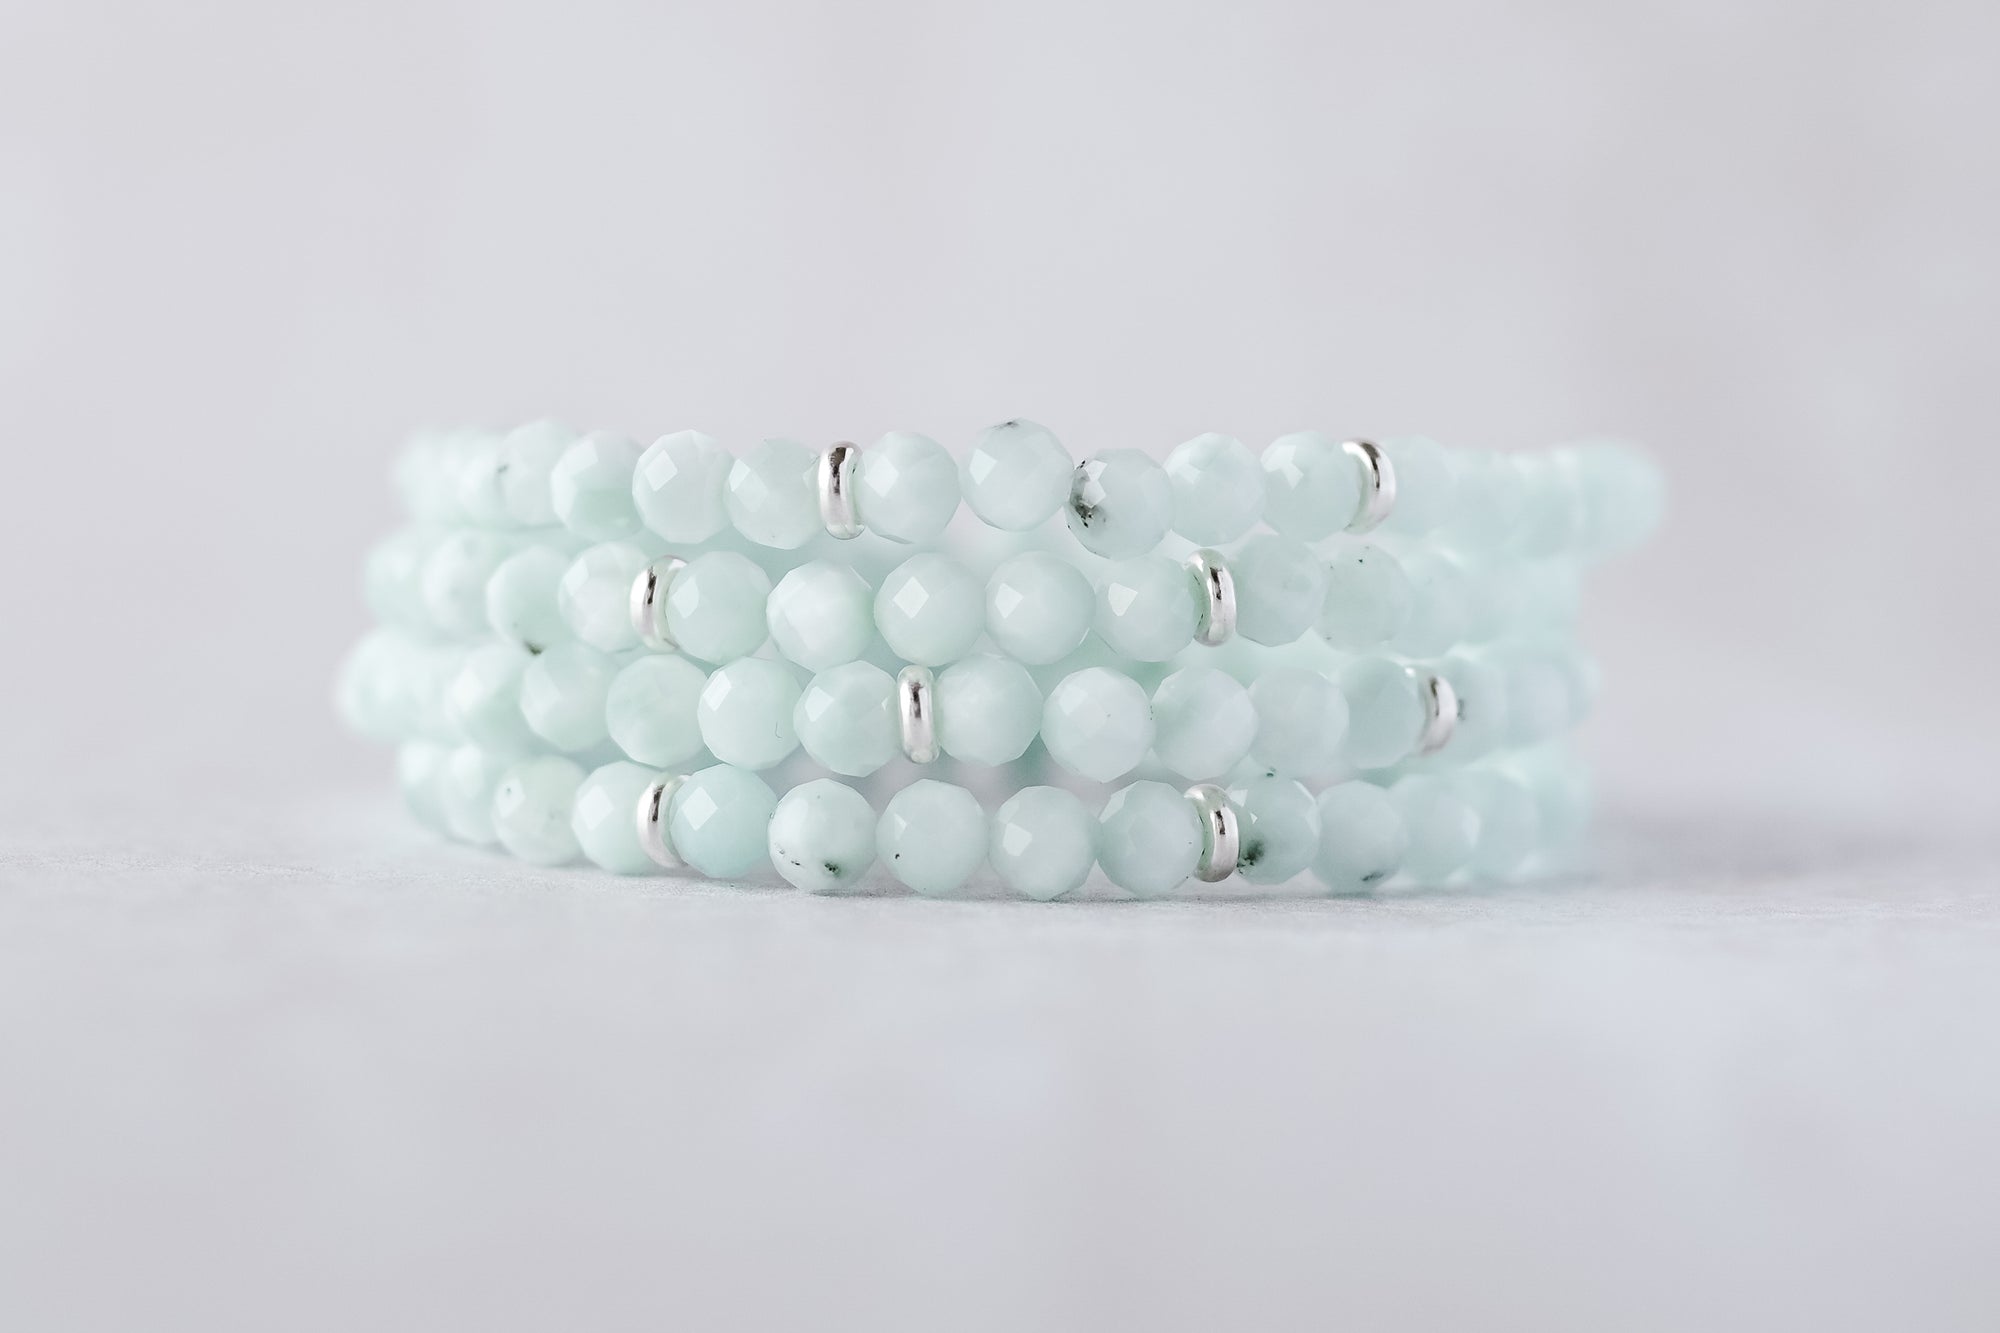 5mm Faceted Green Angelite Luxe Bracelet